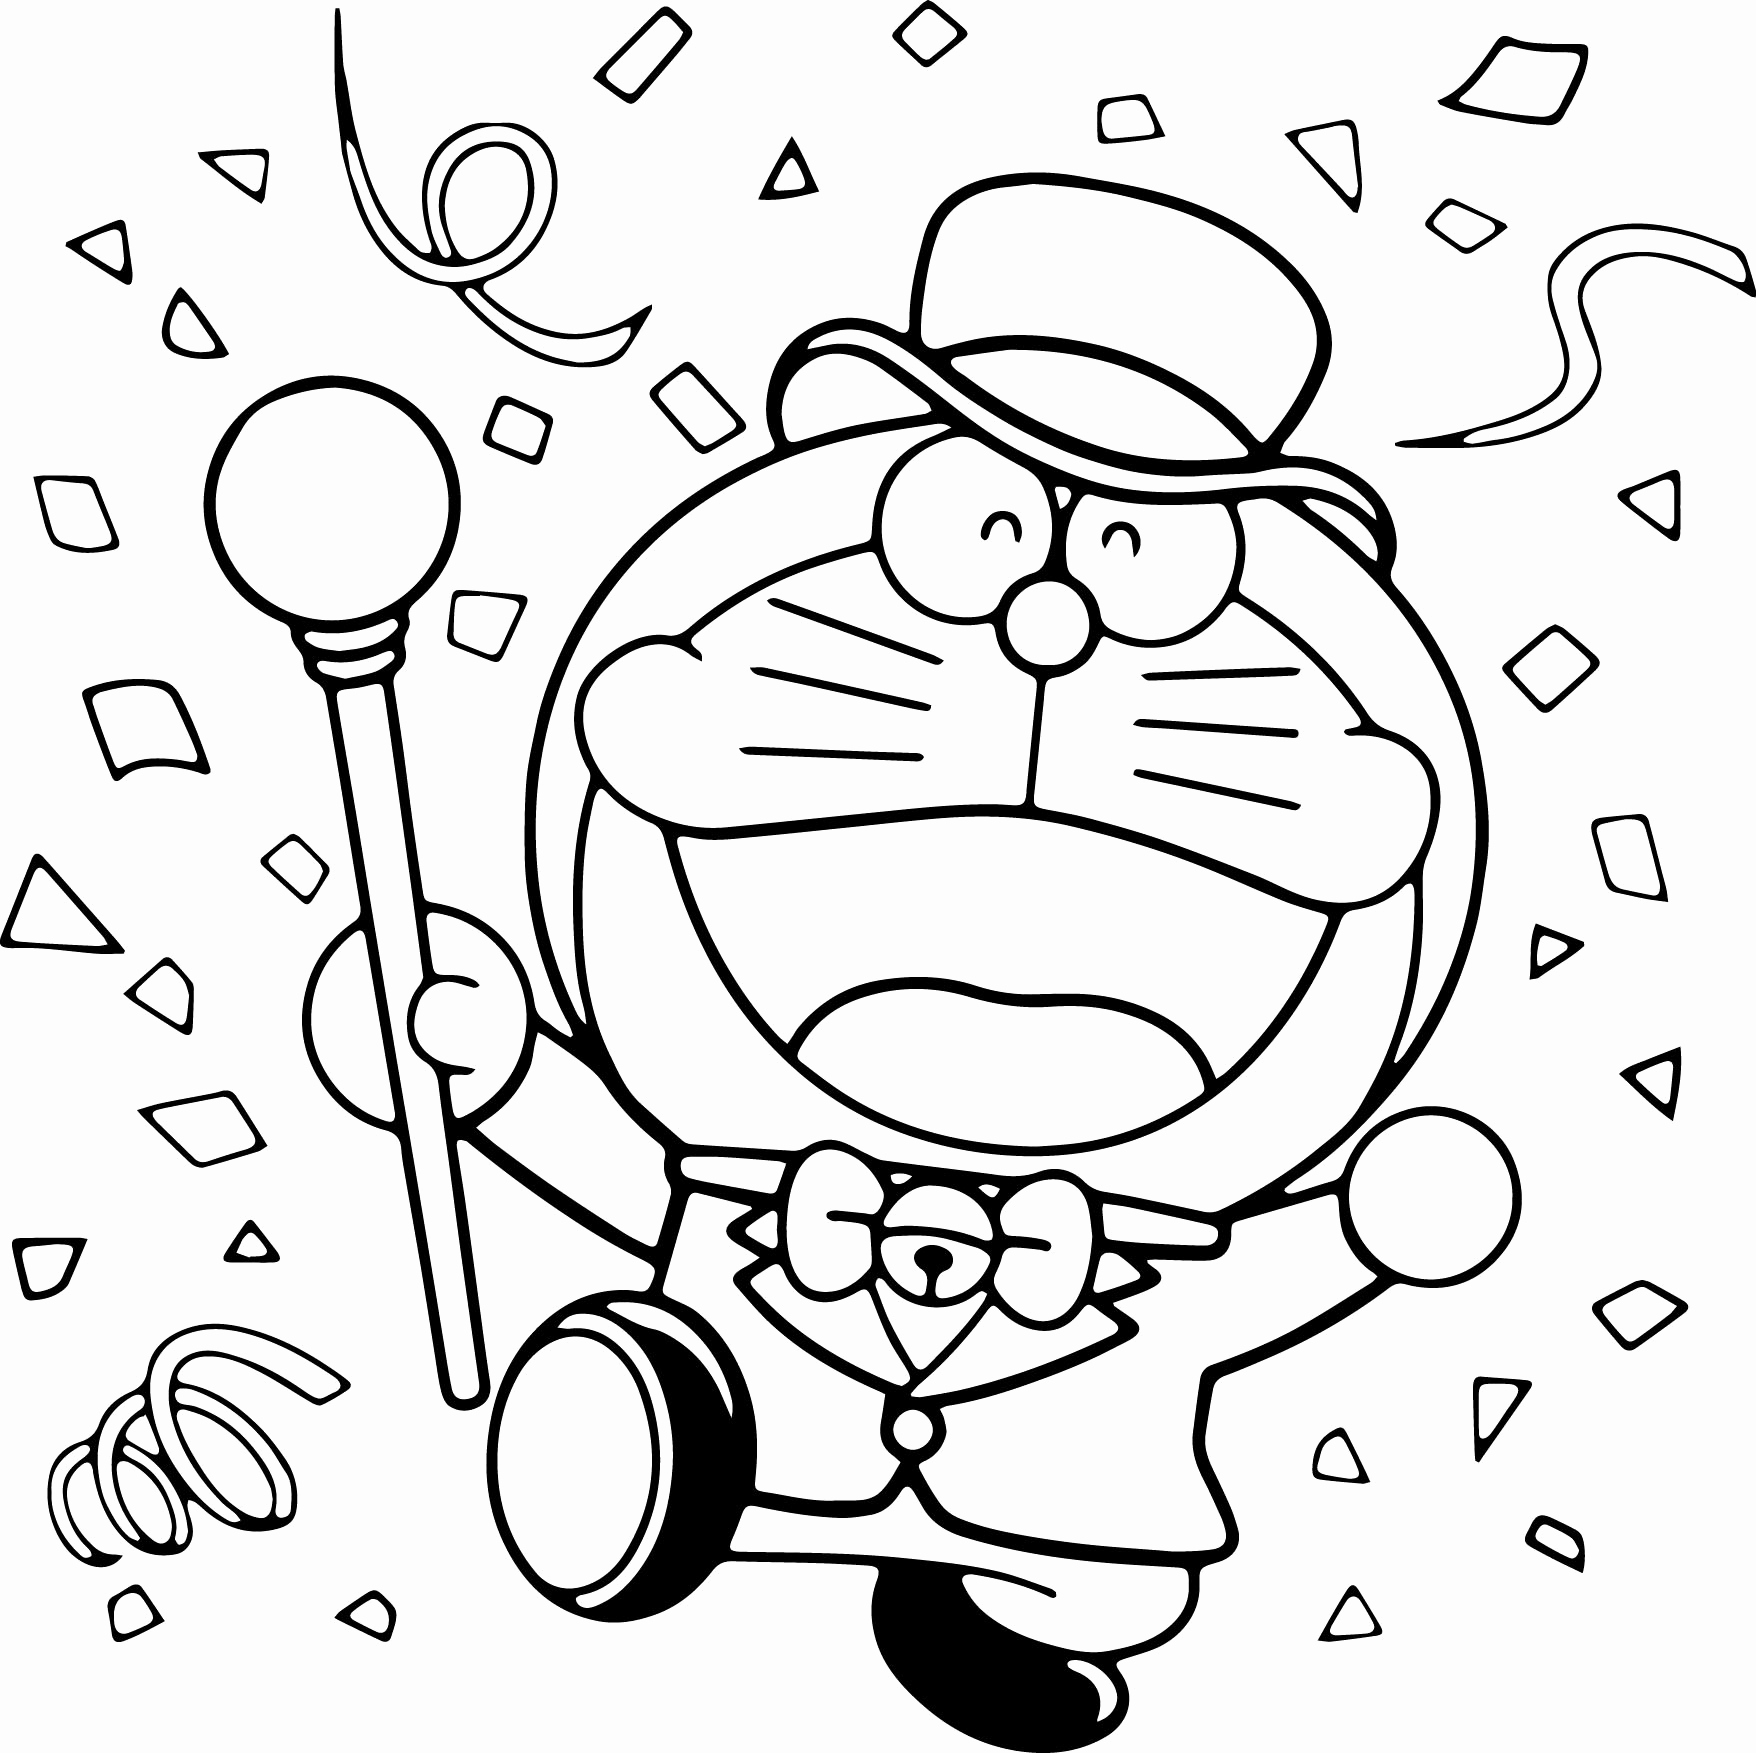 Doraemon Magician Coloring Page - Free Printable Coloring Pages for Kids